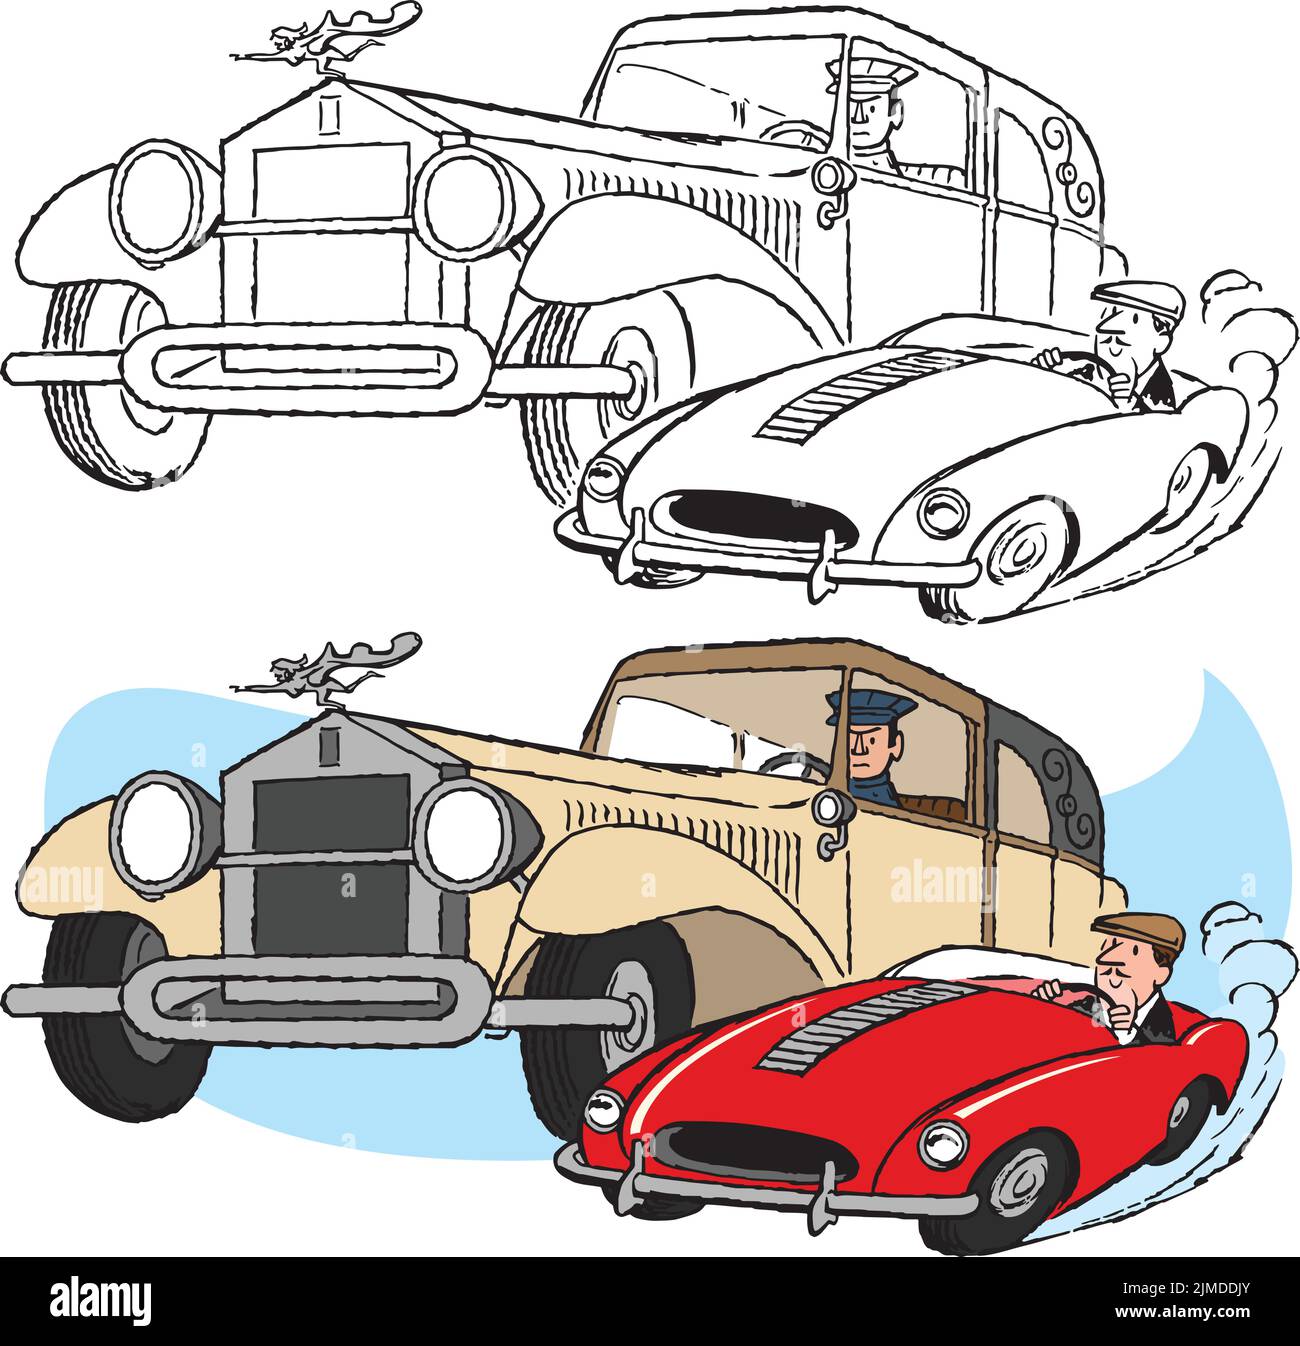 A vintage retro cartoon of a sports car speeding past and overtaking an older jalopy. Stock Vector